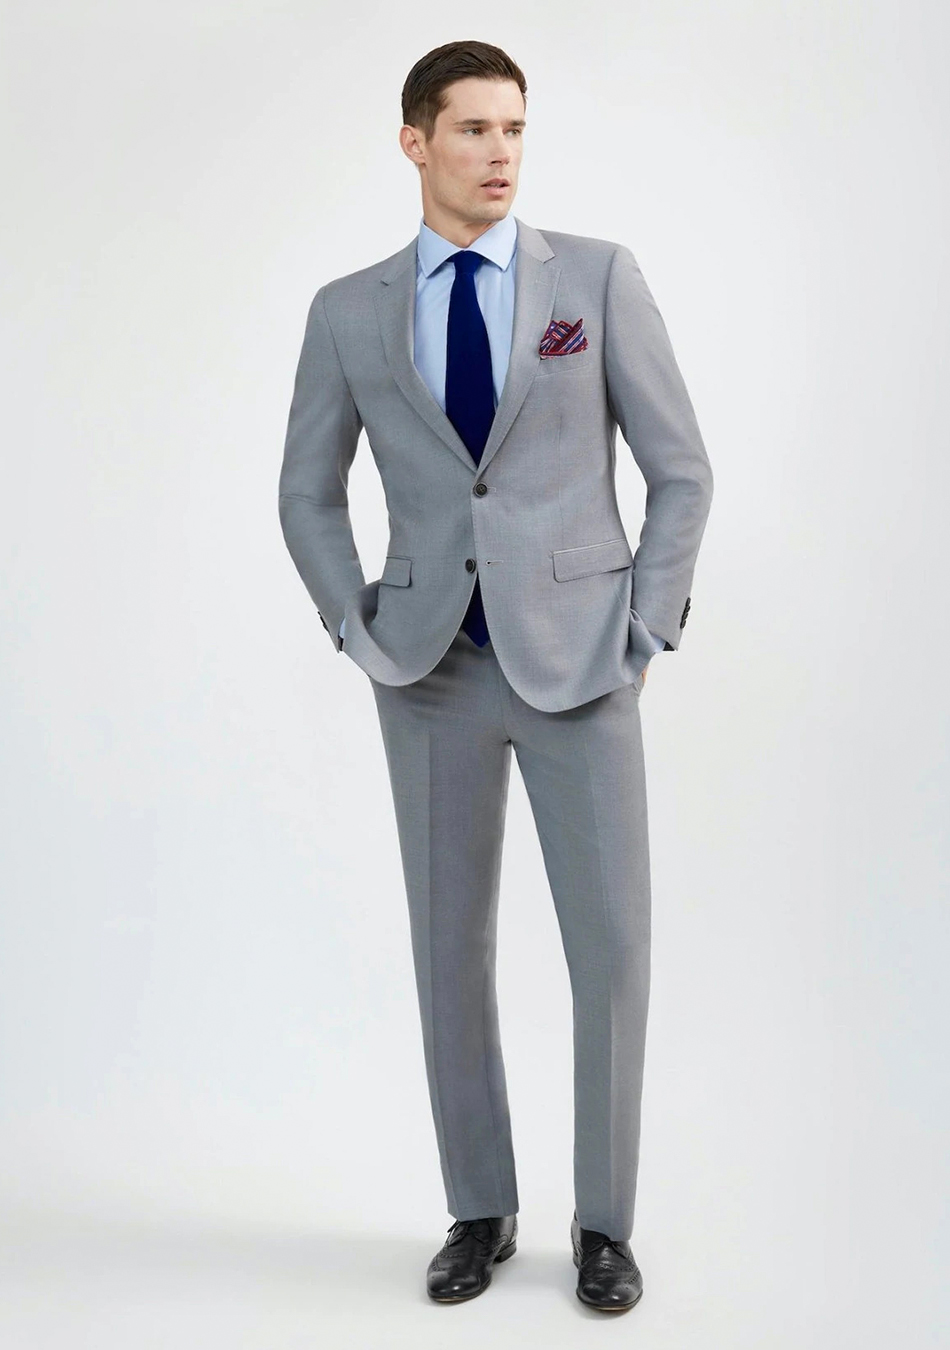 Light grey suit, blue shirt, navy tie, and black derby shoes